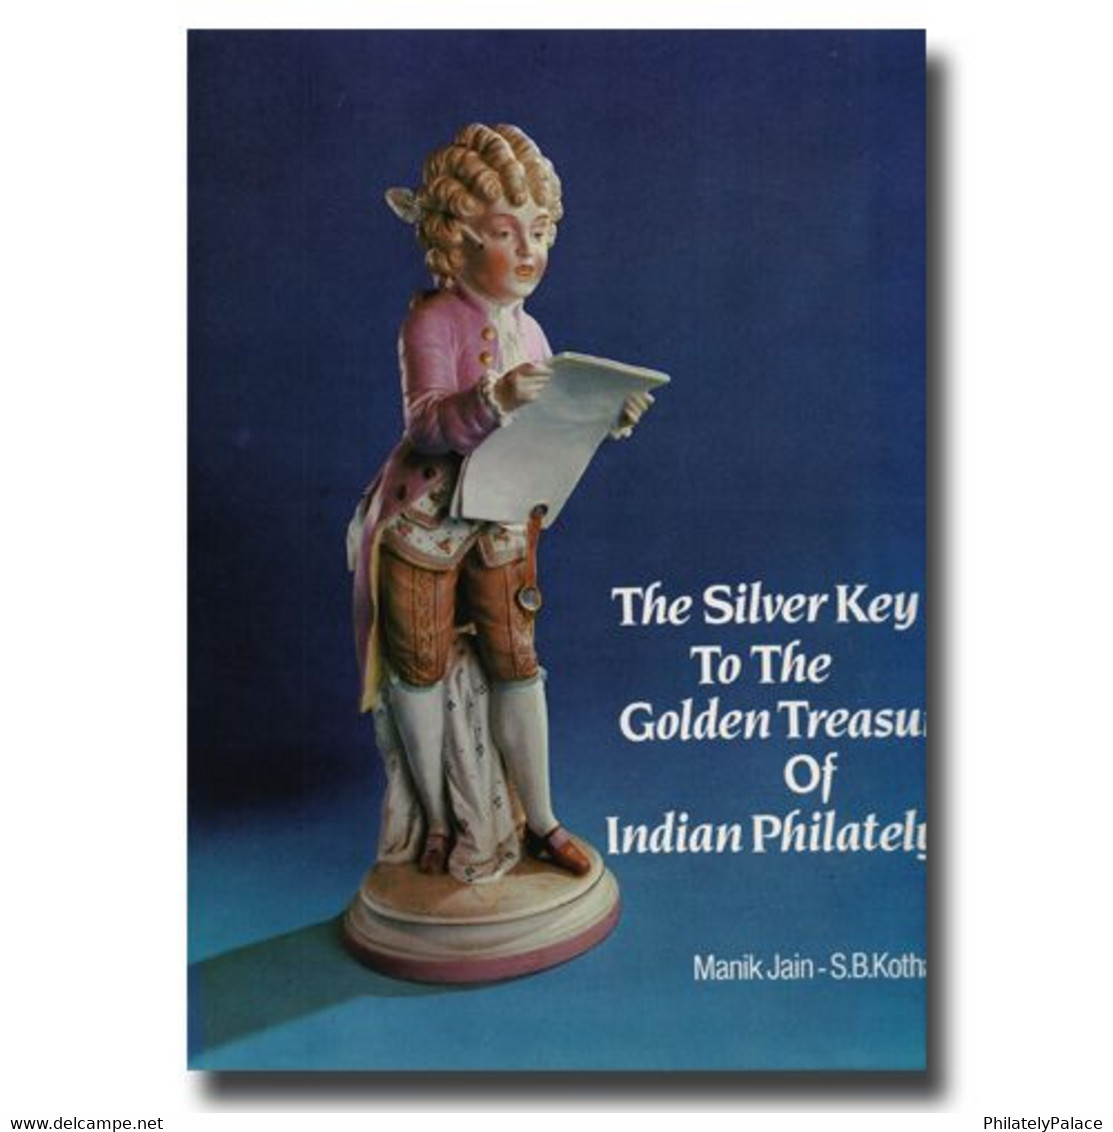 The Silver Key To The Golden Treasure Of Indian Philately By Manik Jain And S.B.Kothari Hardbound  (**) Limited Issue - Philately And Postal History